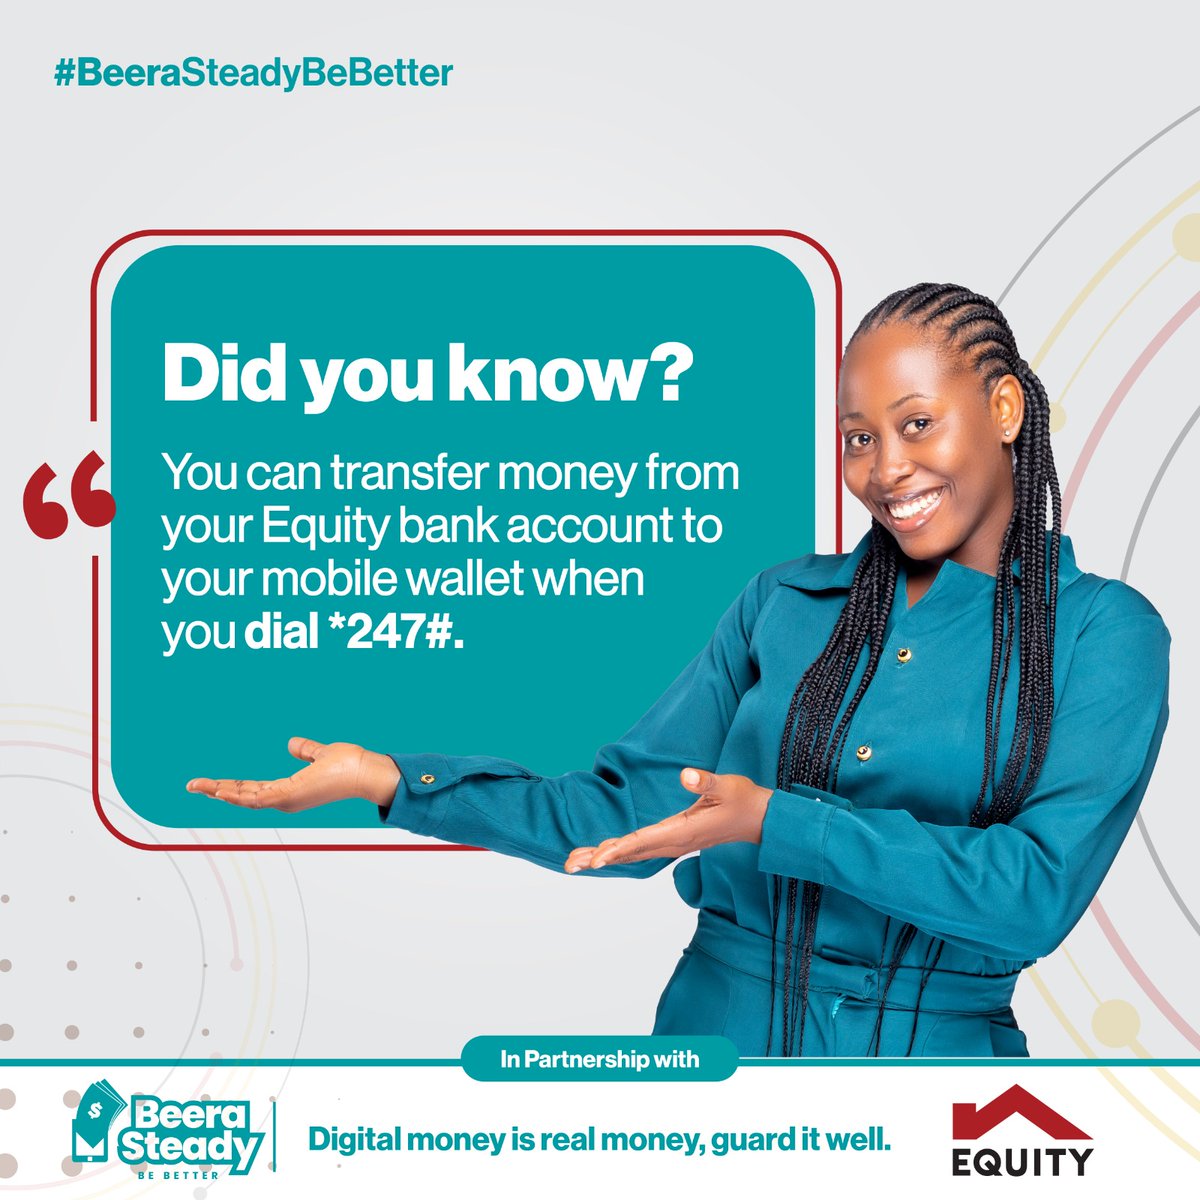 Did you know that with our USSD code *247#, you can enjoy safe and secure cashless transactions on the go? Just dial *247# to try it out. #BeeraSteady